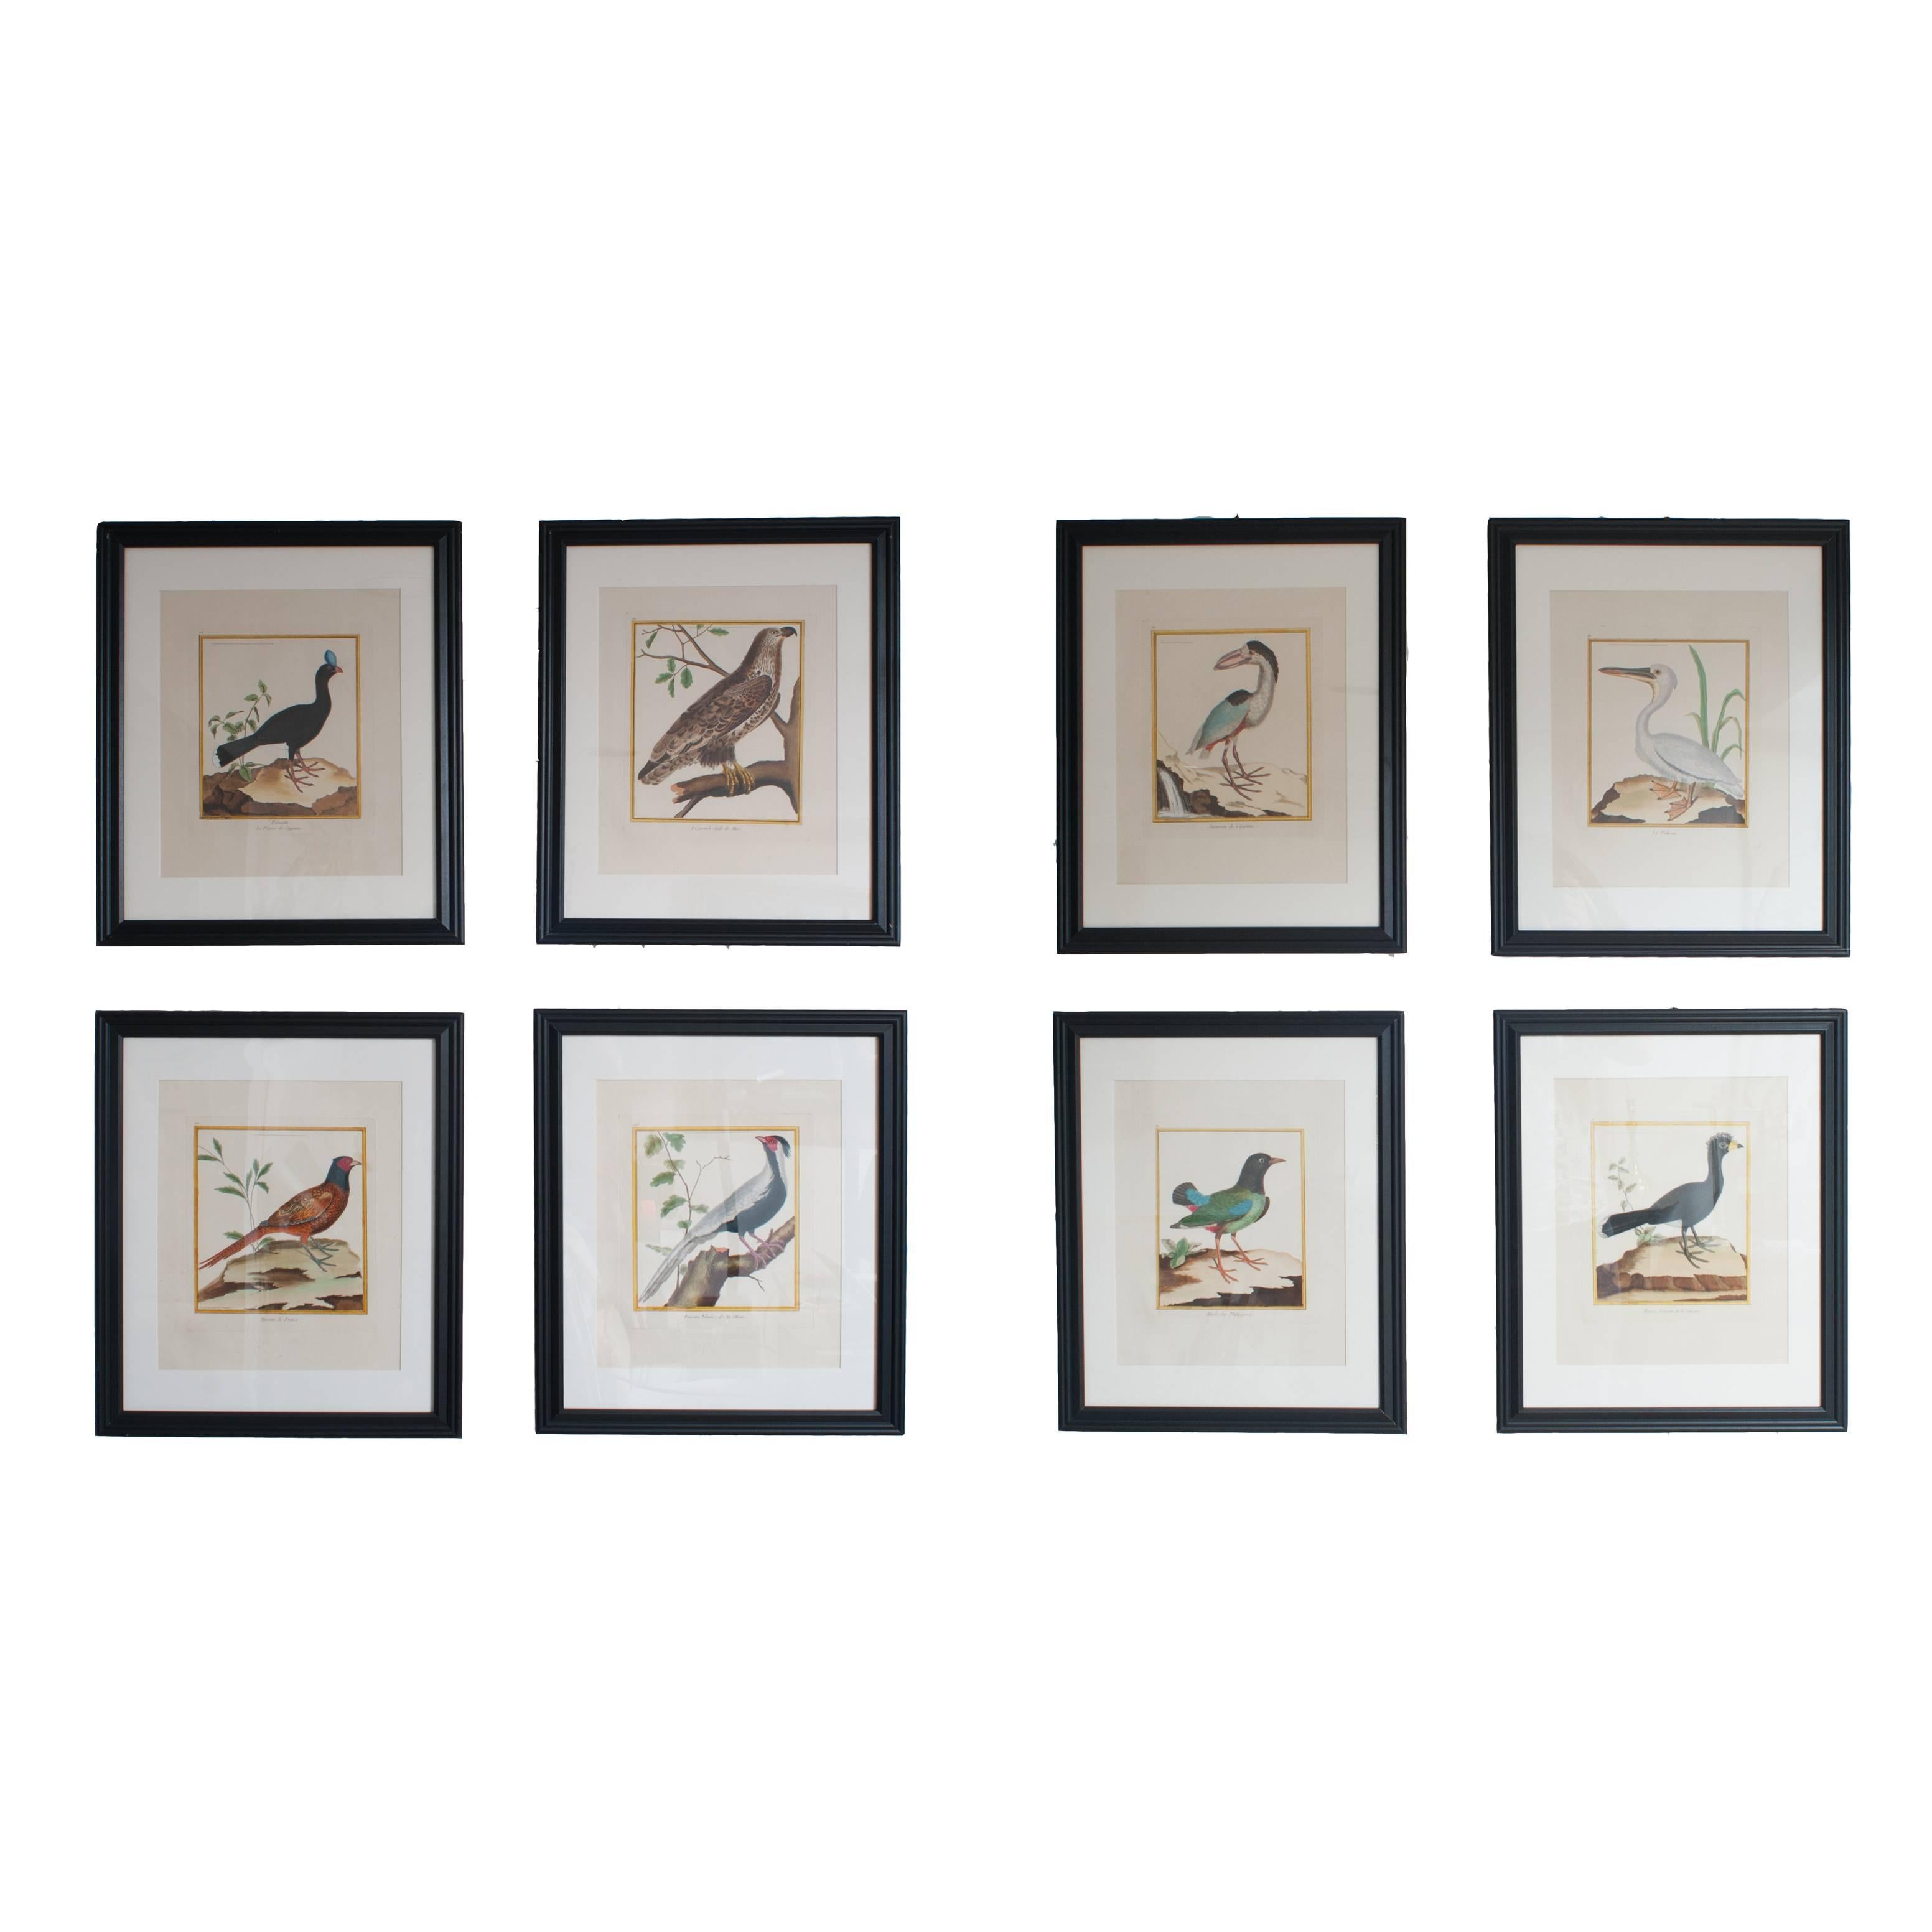 Six Hand Colored Engravings of Birds in New Frames & Matting. By Martinet.